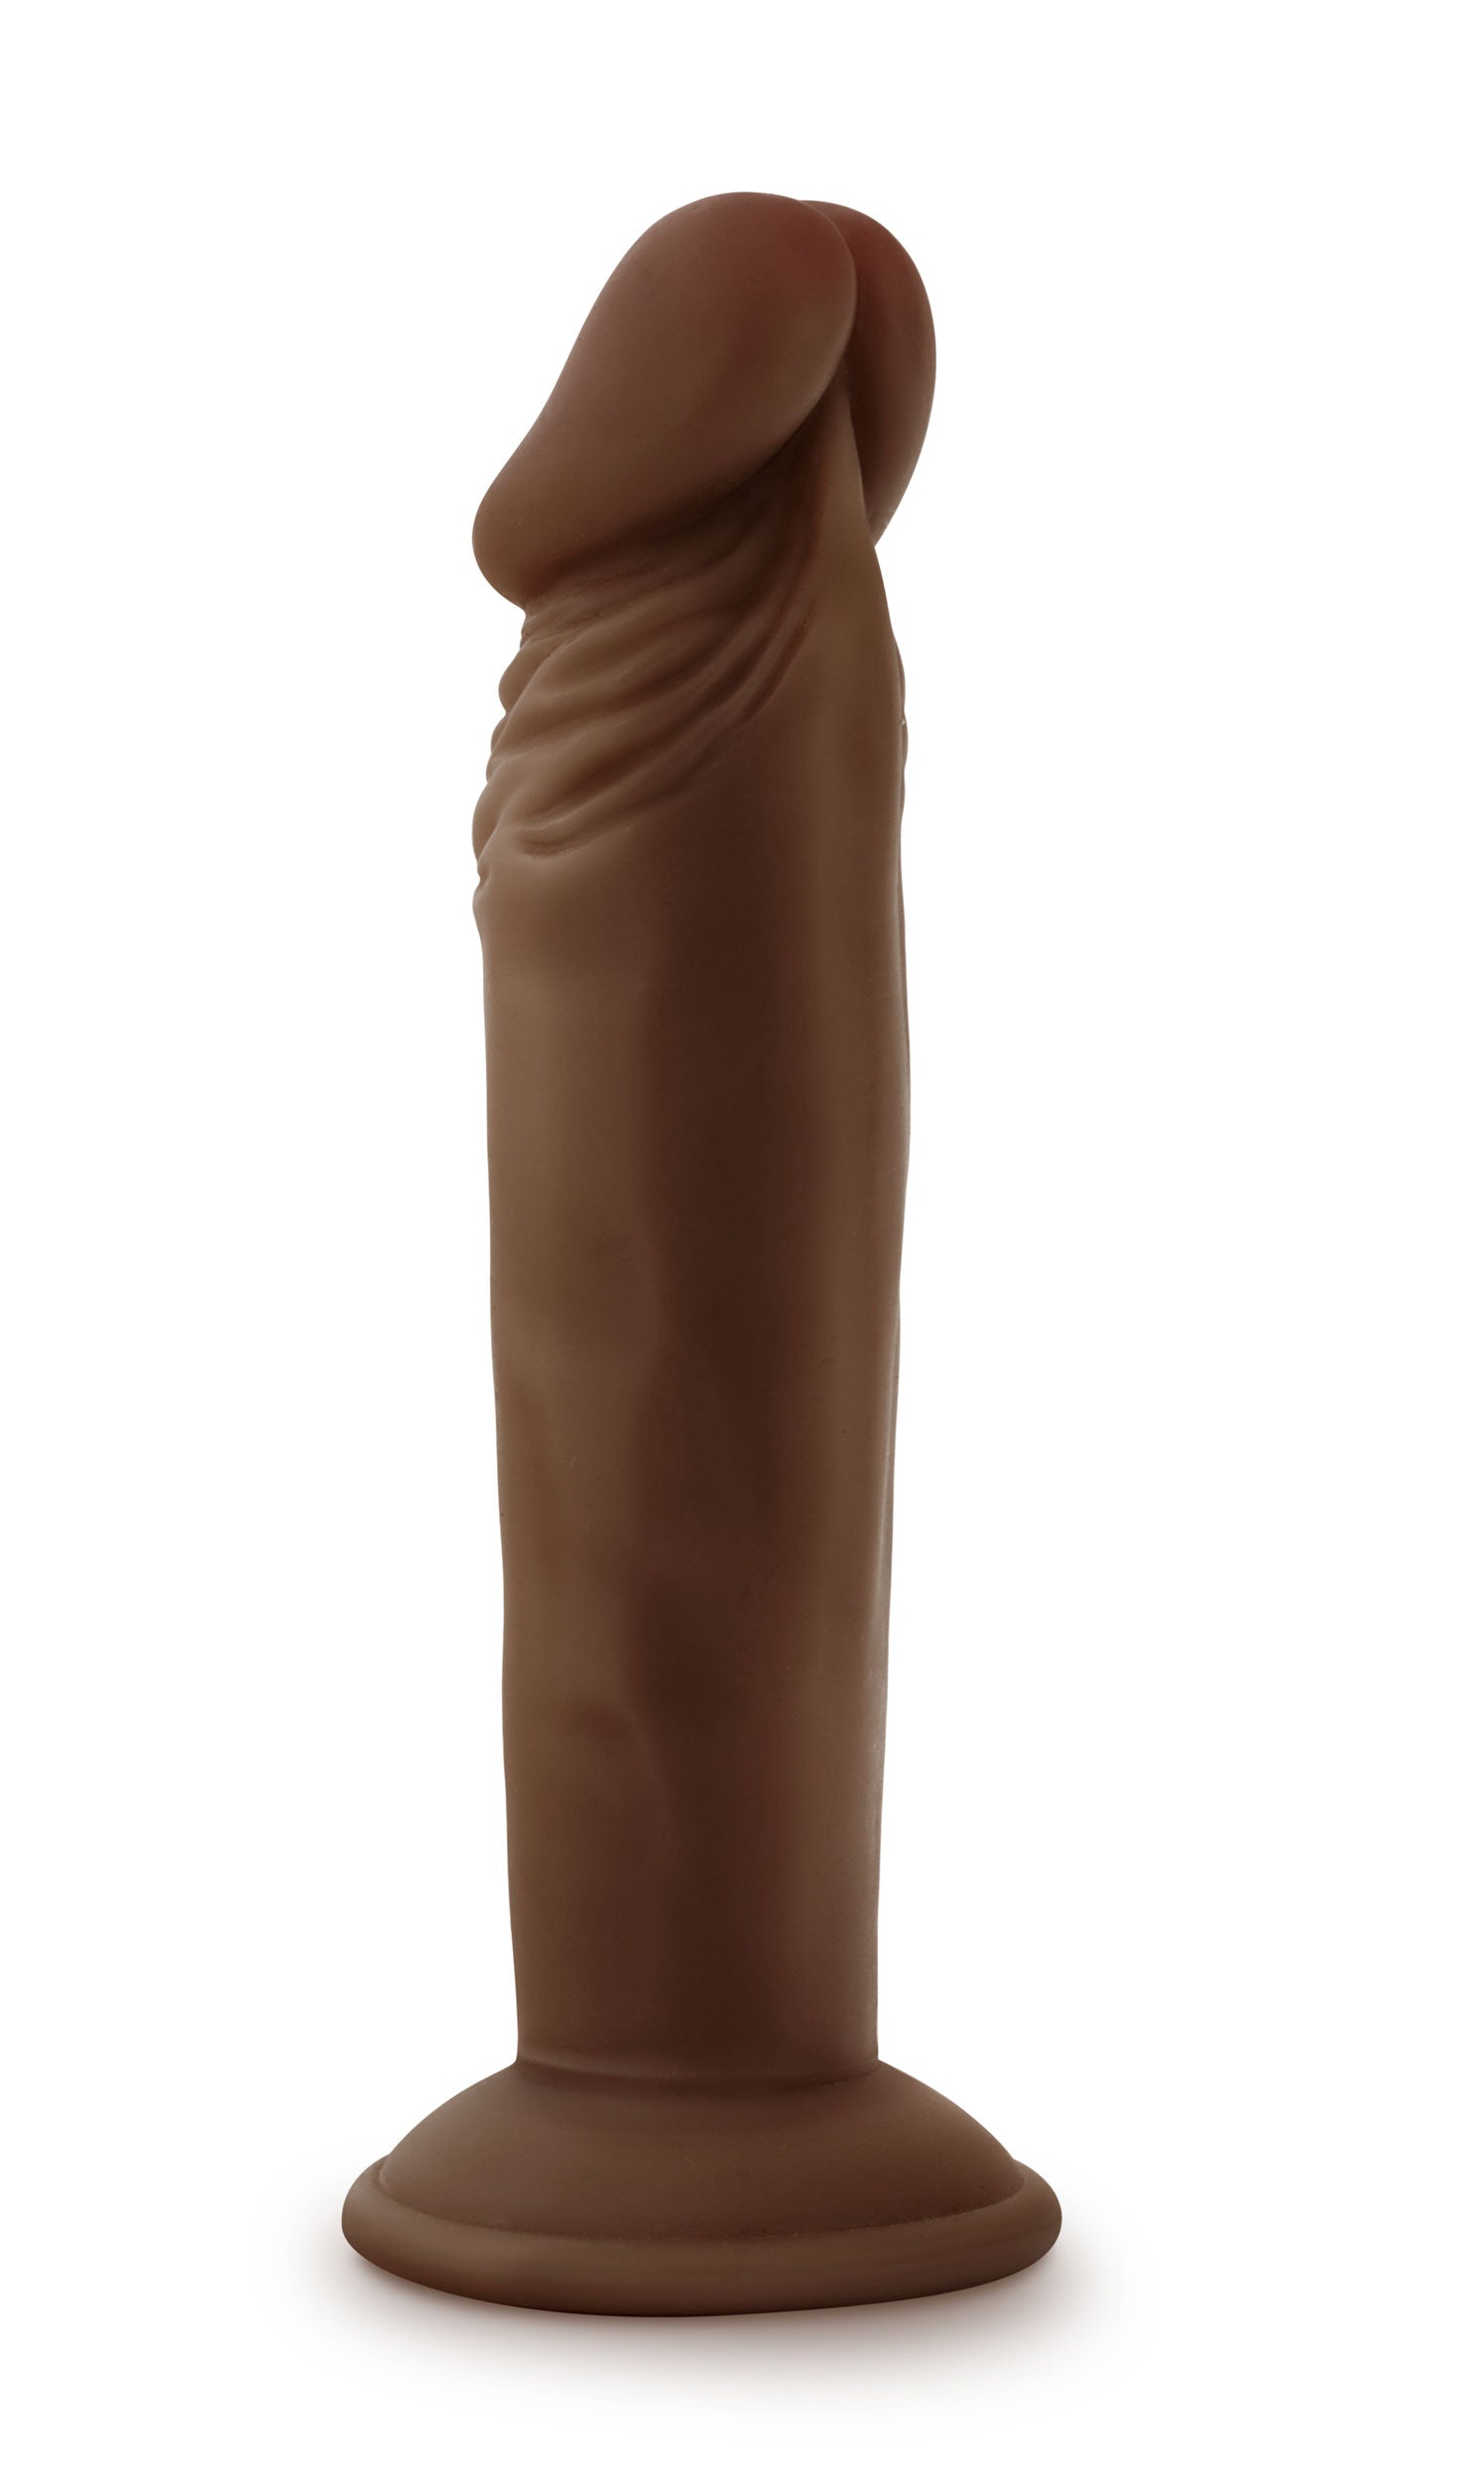 Dr. Skin Plus - 6 Inch Posable Dildo - Chocolate BL-14926